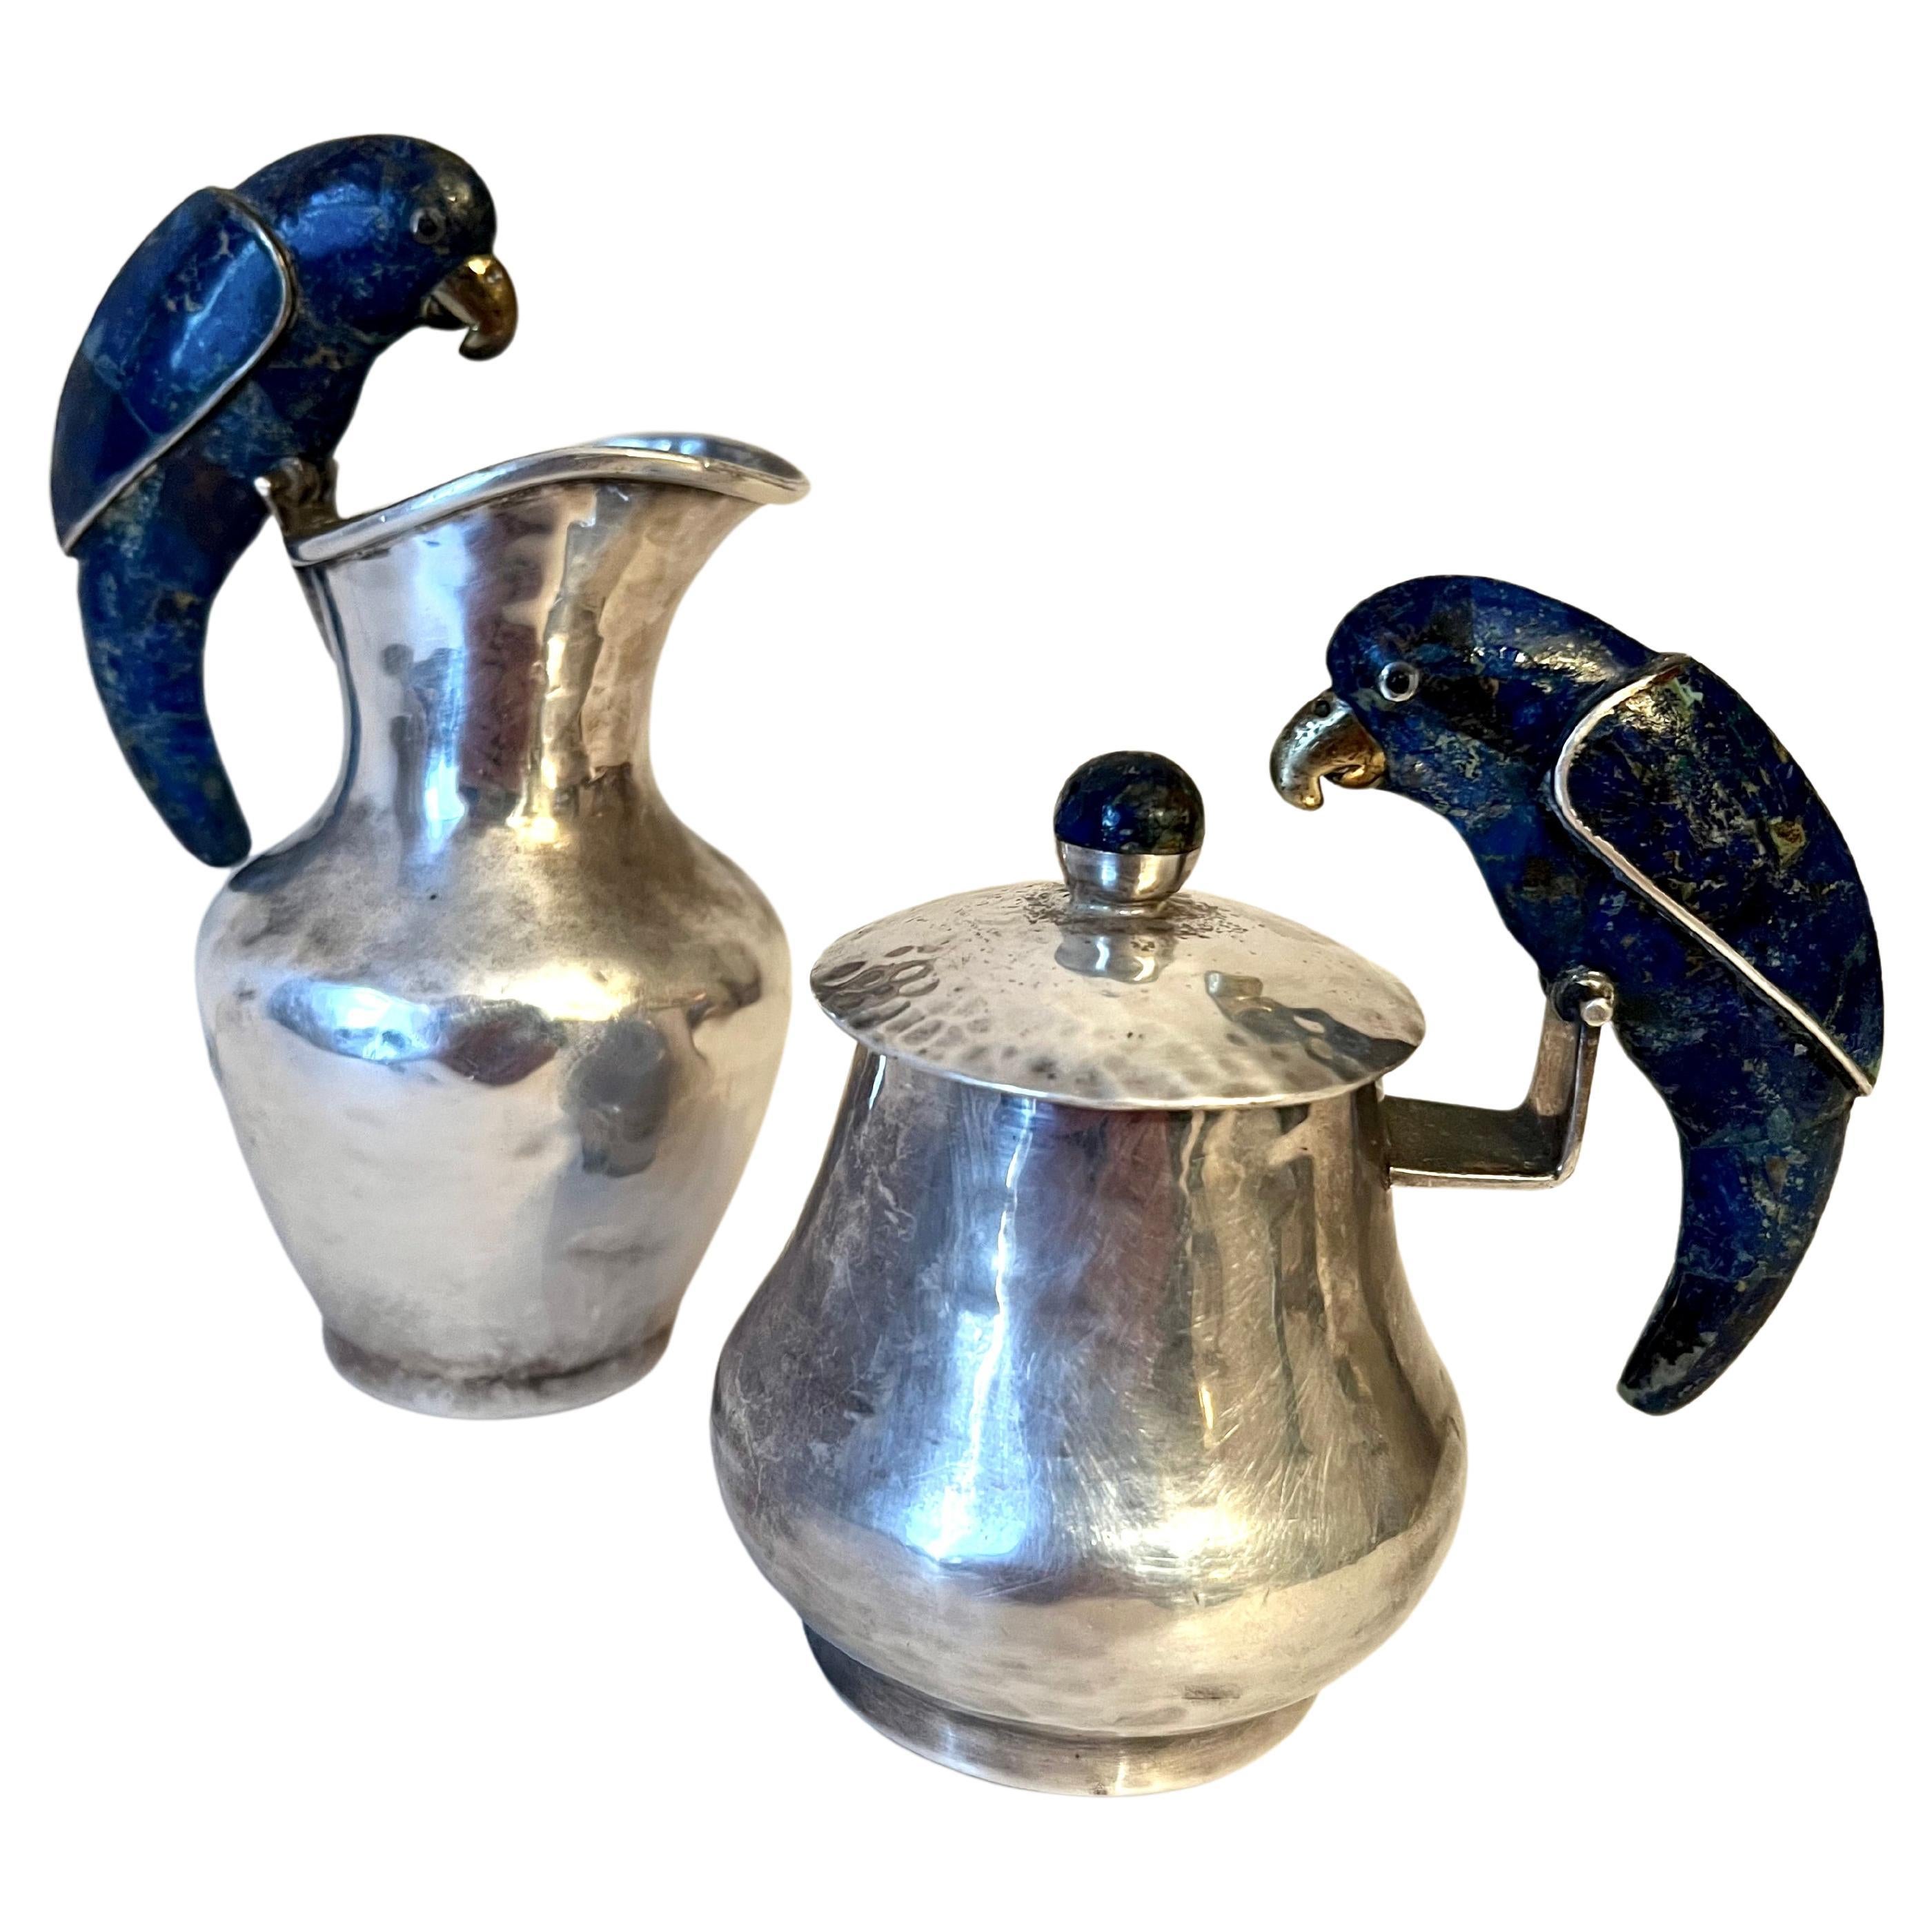 A stunning and rare pair of sterling silver Los Castillo cream and sugar.  The Mexican Silver is made in Taxco Mexico by the iconic Los Castillo.  Hand made with a hammered quality.  The pieces ability to easily go from obscure to one of the most